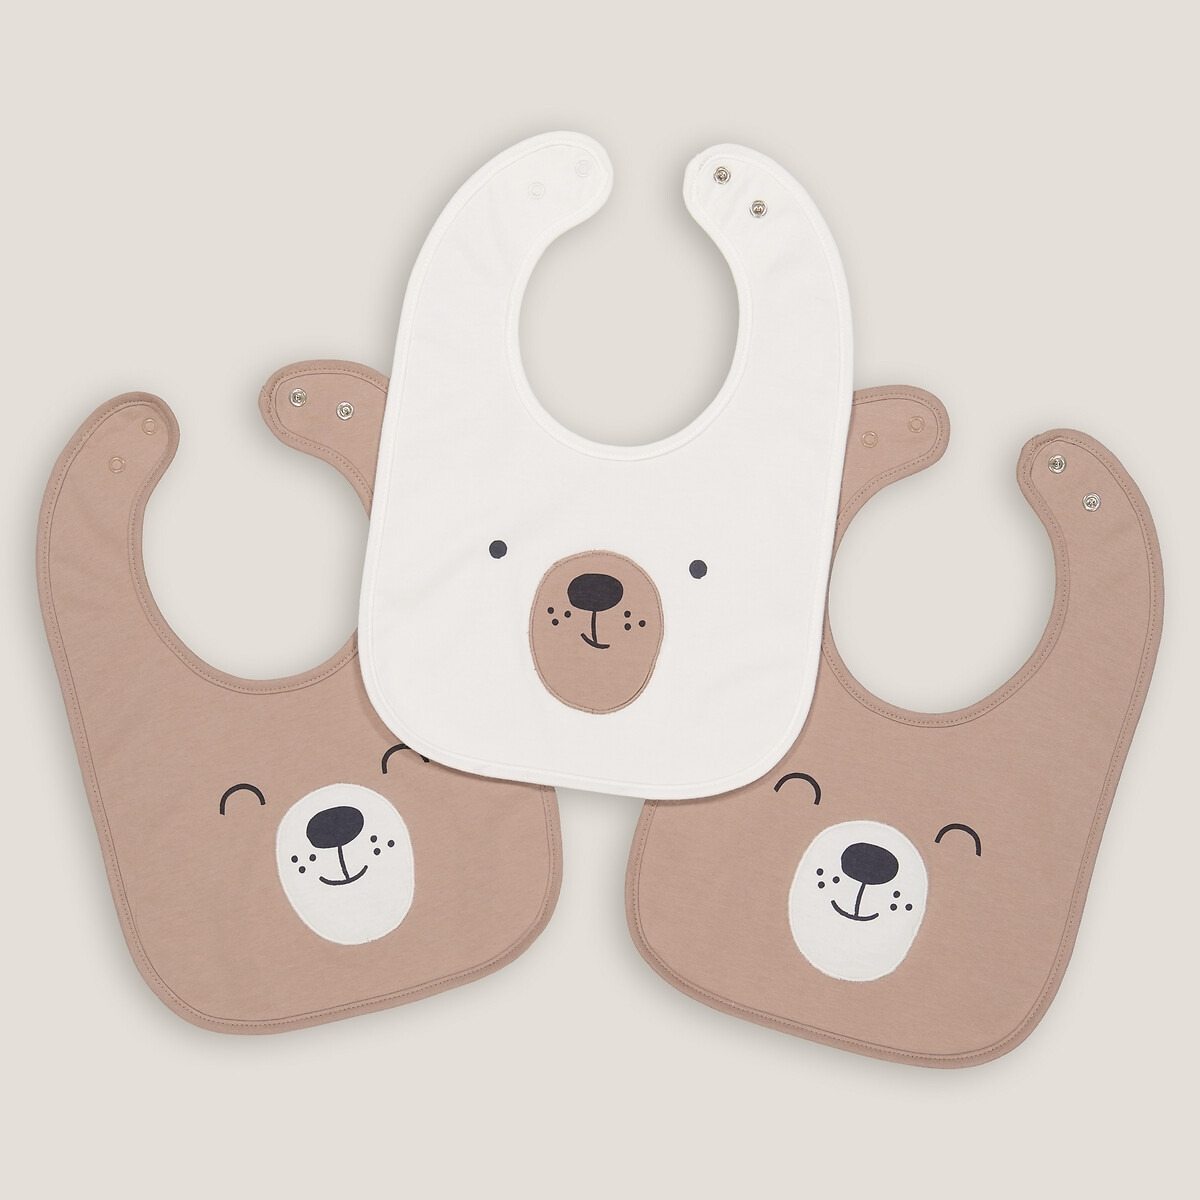 Pack of 3 Bibs in Cotton Jersey Towelling with Teddy Bear Design - image 1